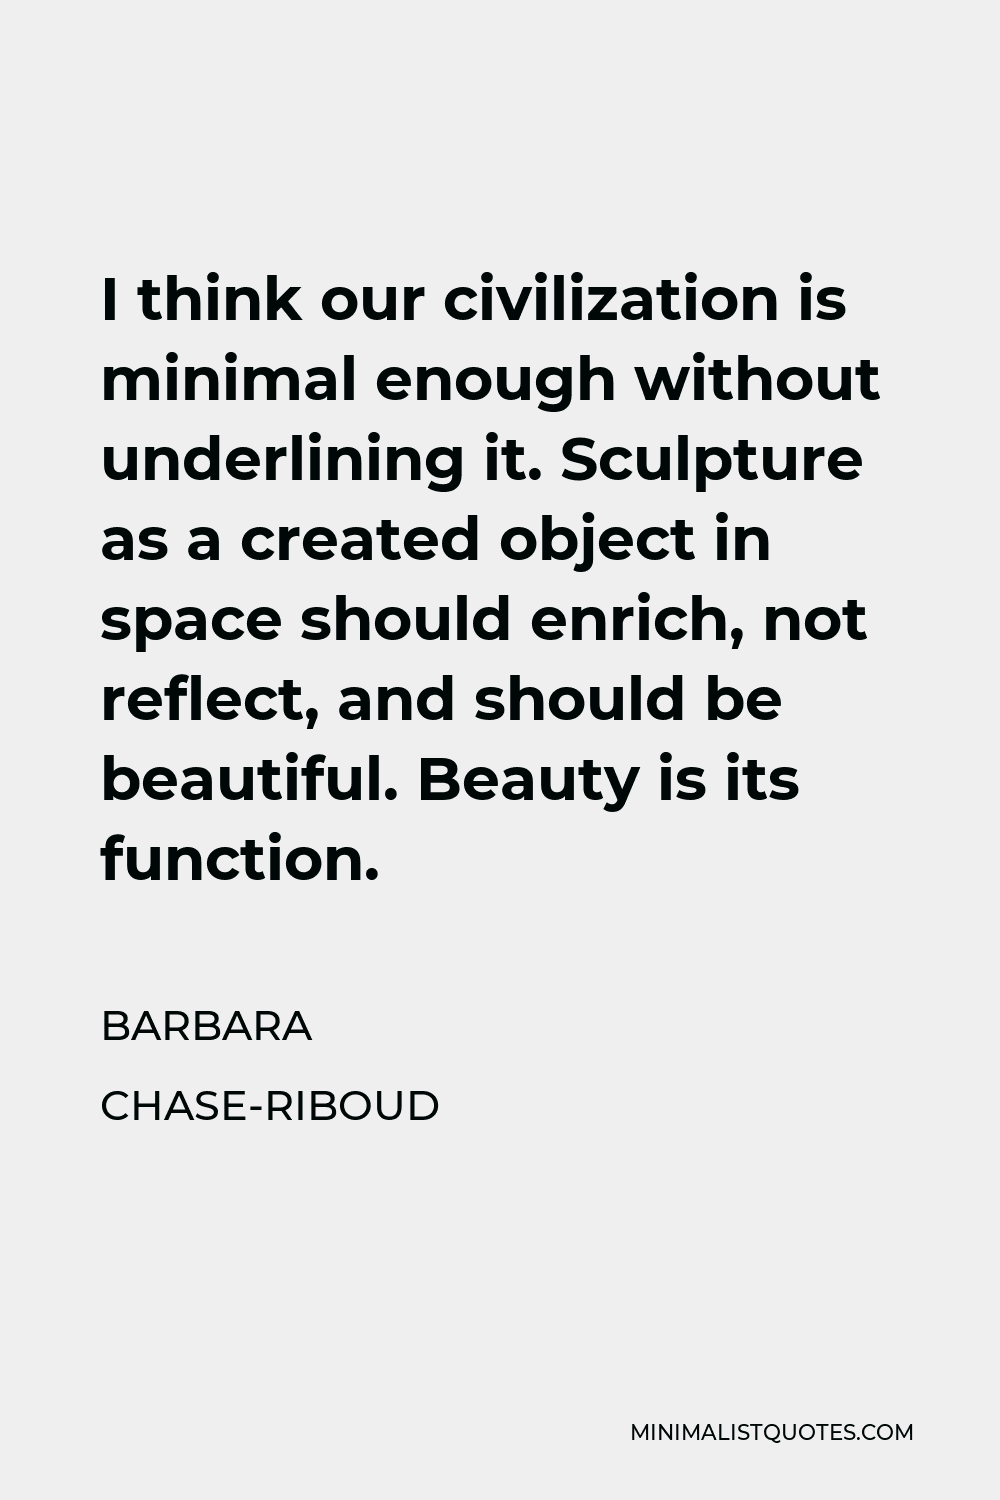 Barbara Chase-Riboud Quote - I think our civilization is minimal enough without underlining it. Sculpture as a created object in space should enrich, not reflect, and should be beautiful. Beauty is its function.